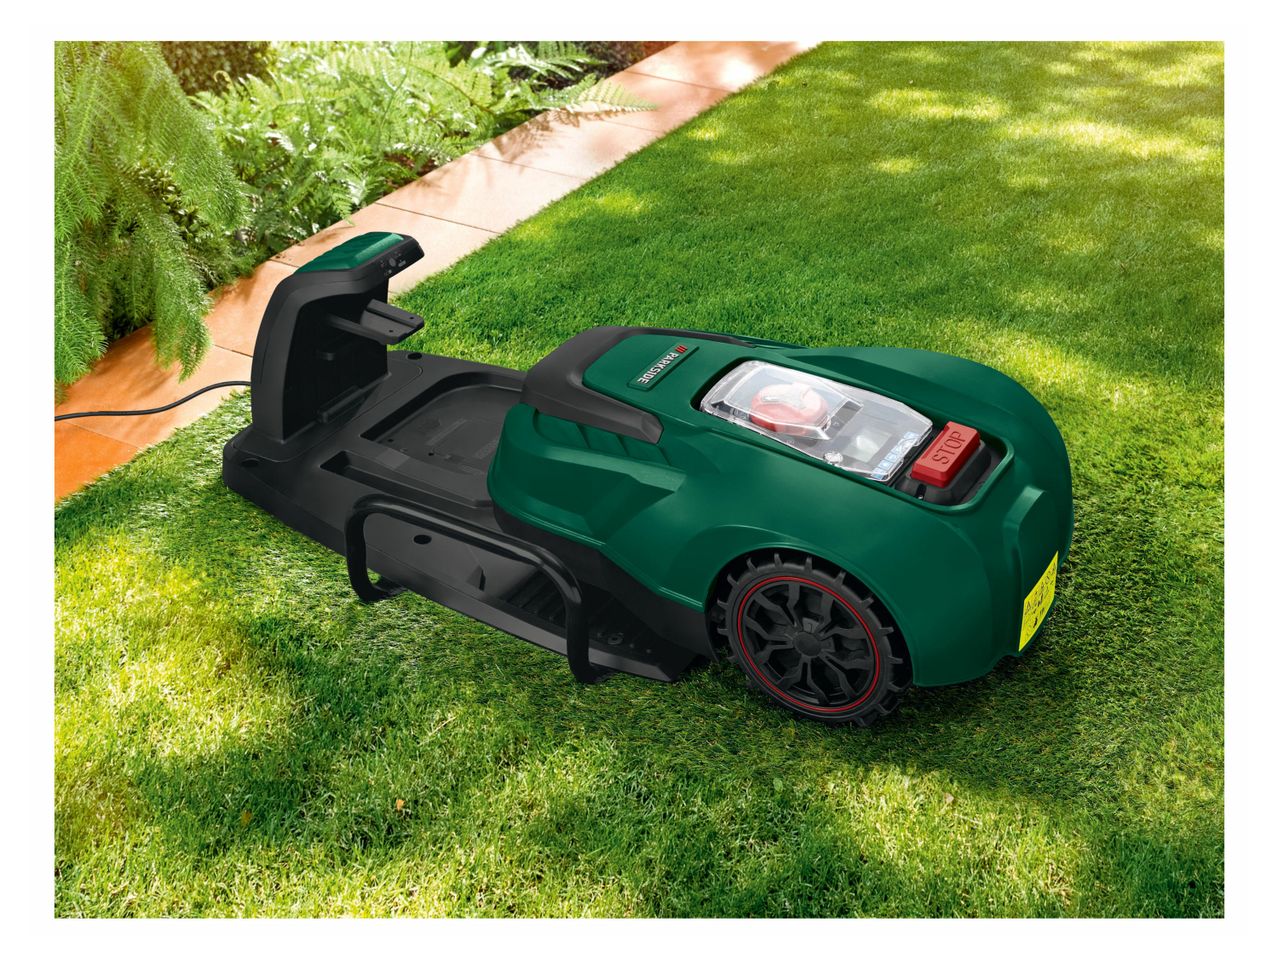 Go to full screen view: Robotic Lawn Mower - Image 1